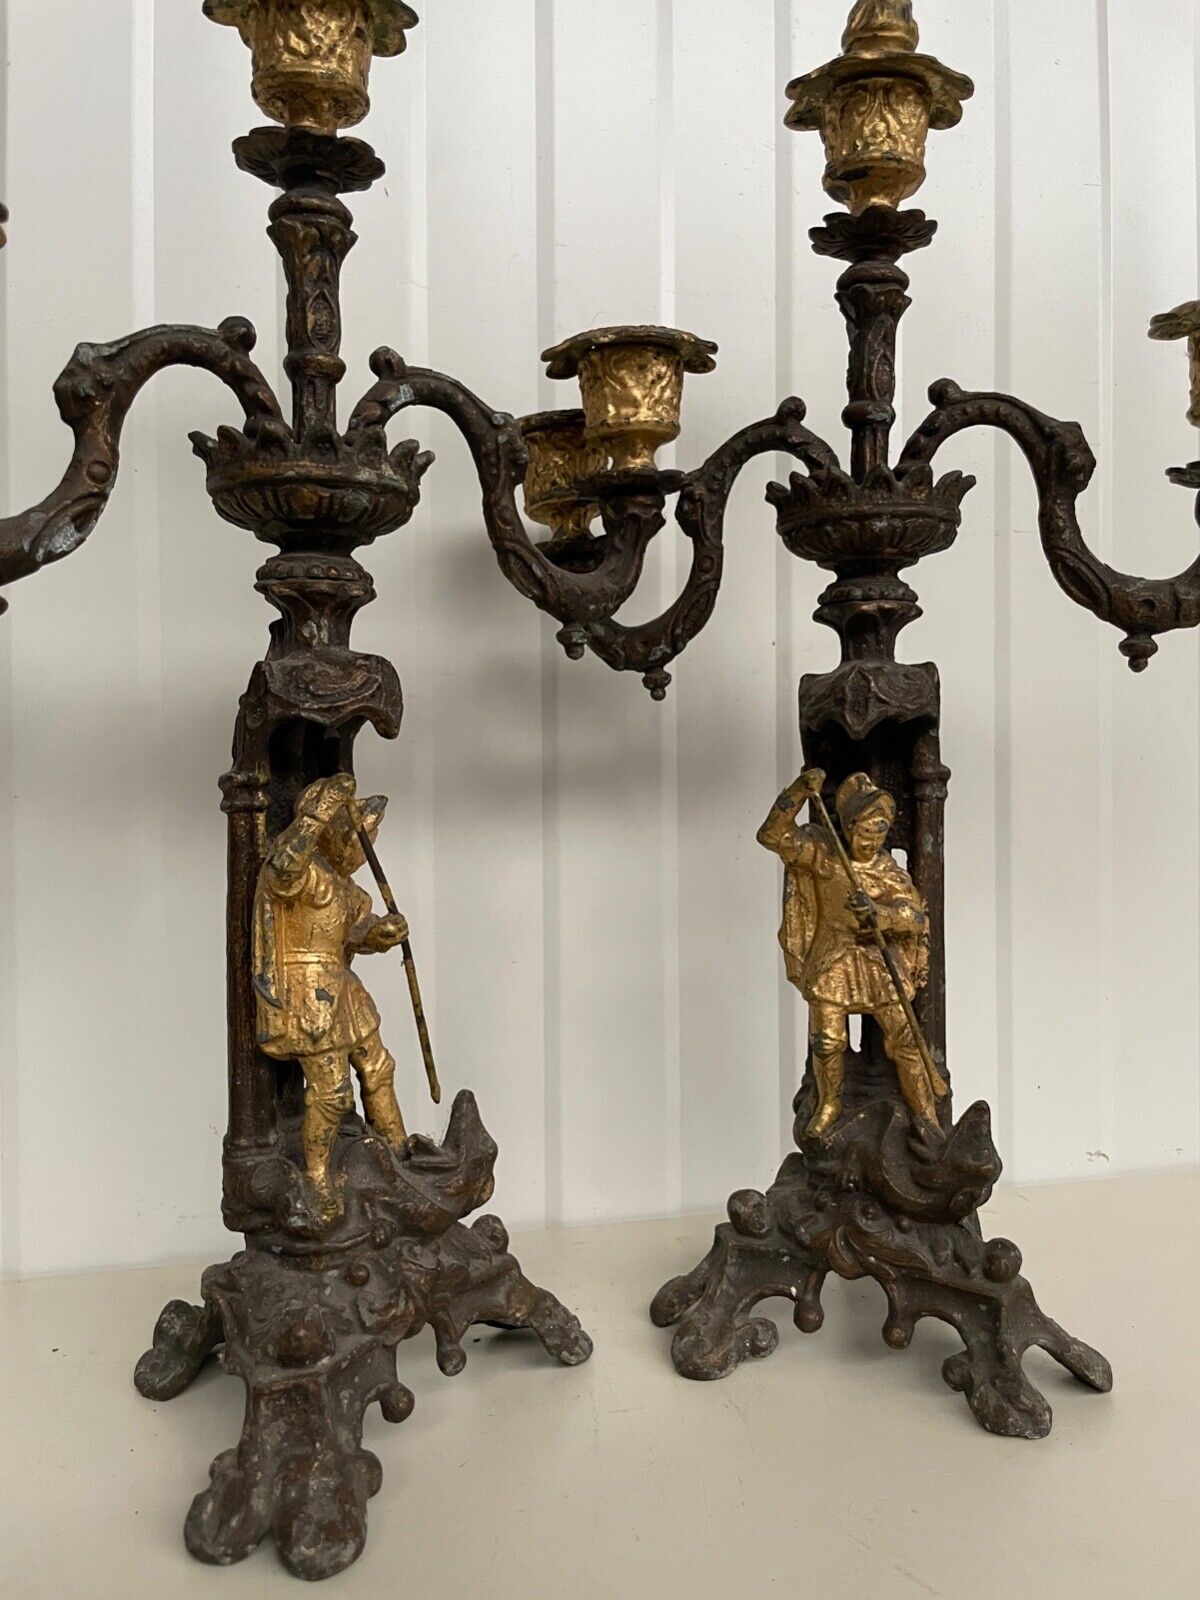 SALE RARE Pair of Gothic Revival Candlesticks with George & the dragon